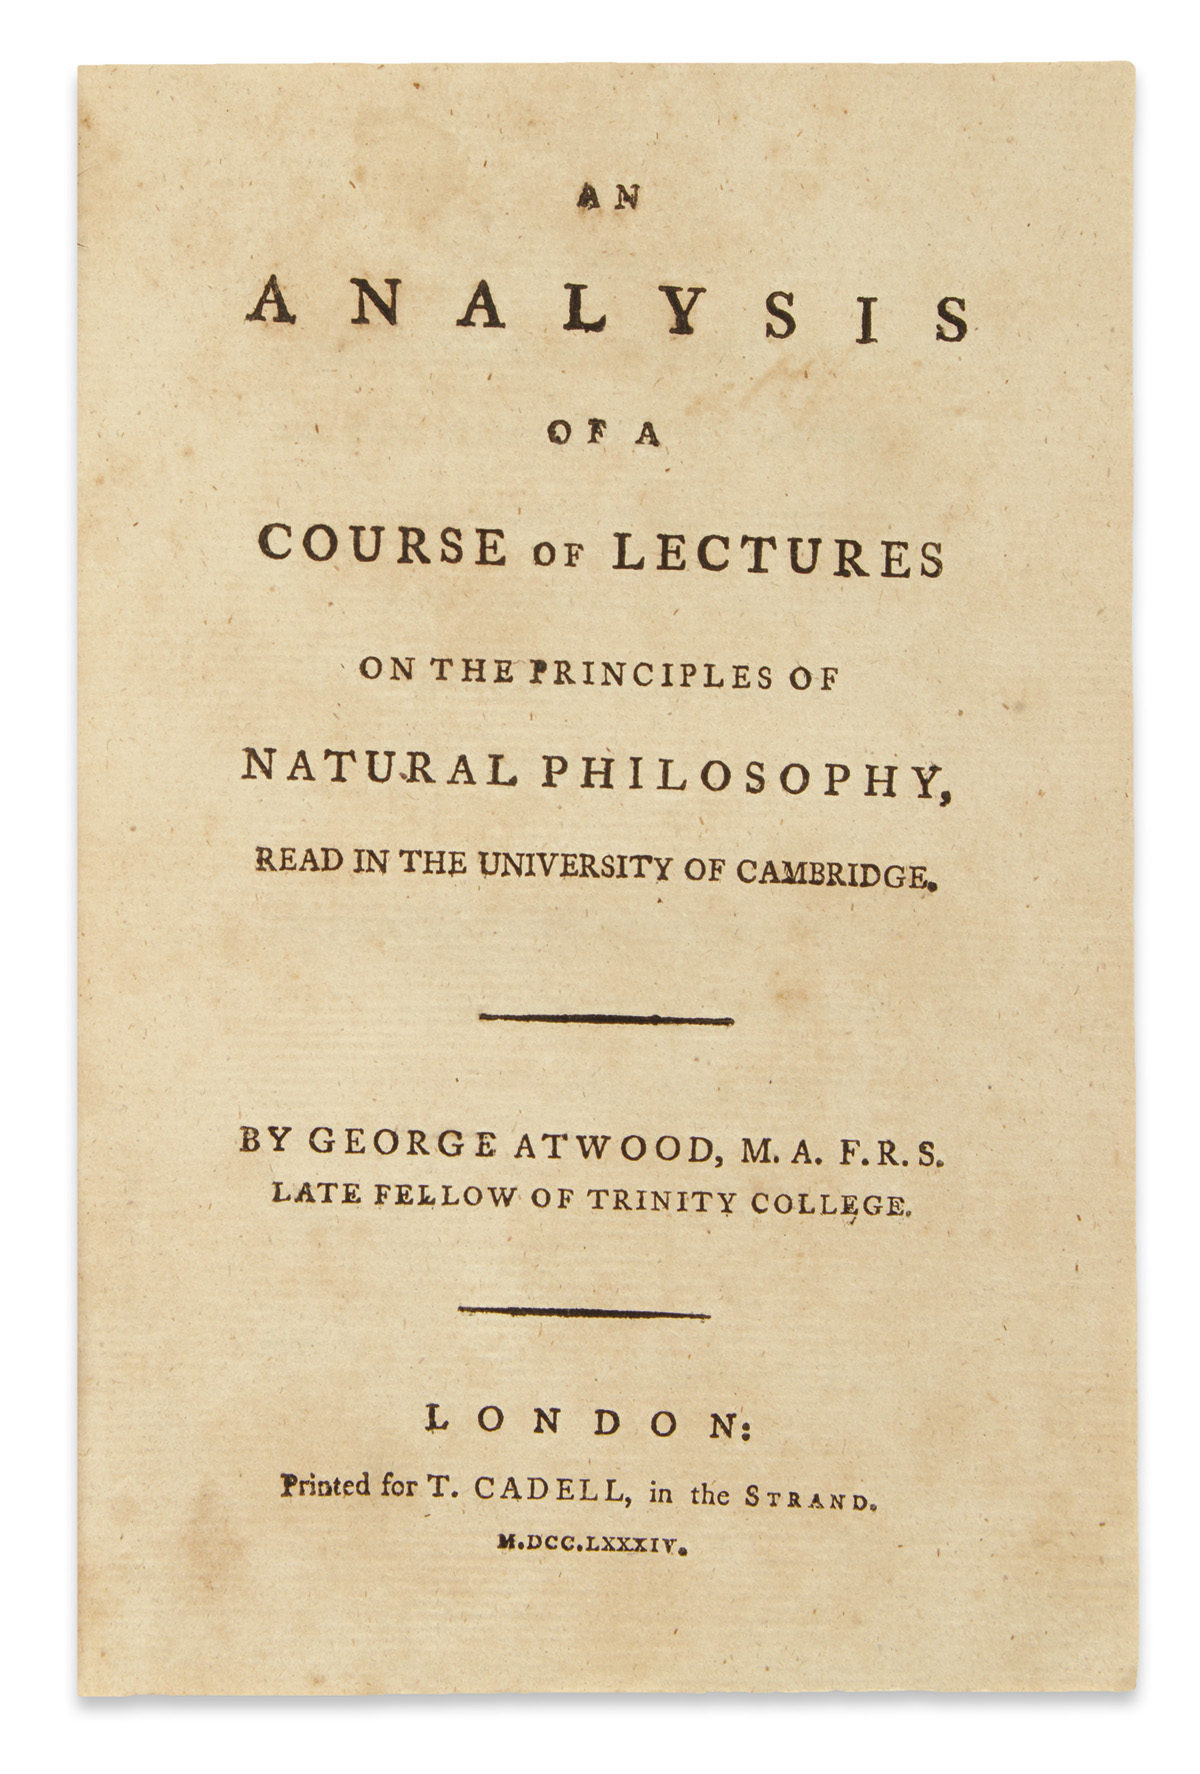 ATWOOD, GEORGE. An Analysis of a Course of Lectures on the Principles of Natural Philosophy, read in the University of Cambridge.  1784